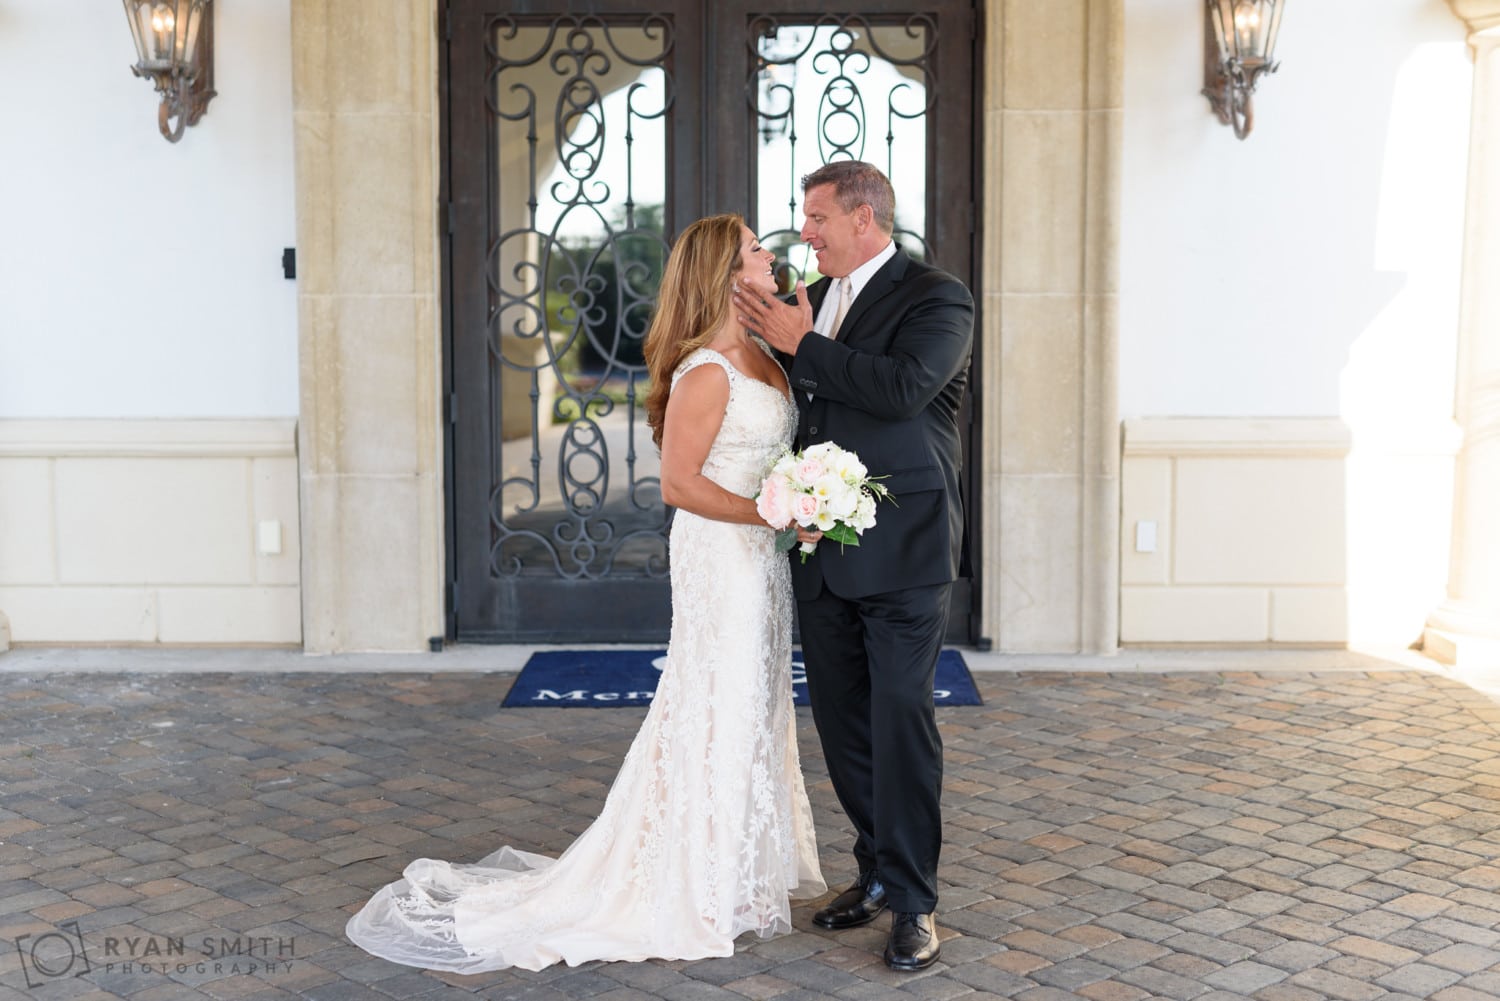 Groom touching brides face in front of the doors - Members Club at Grande Dunes